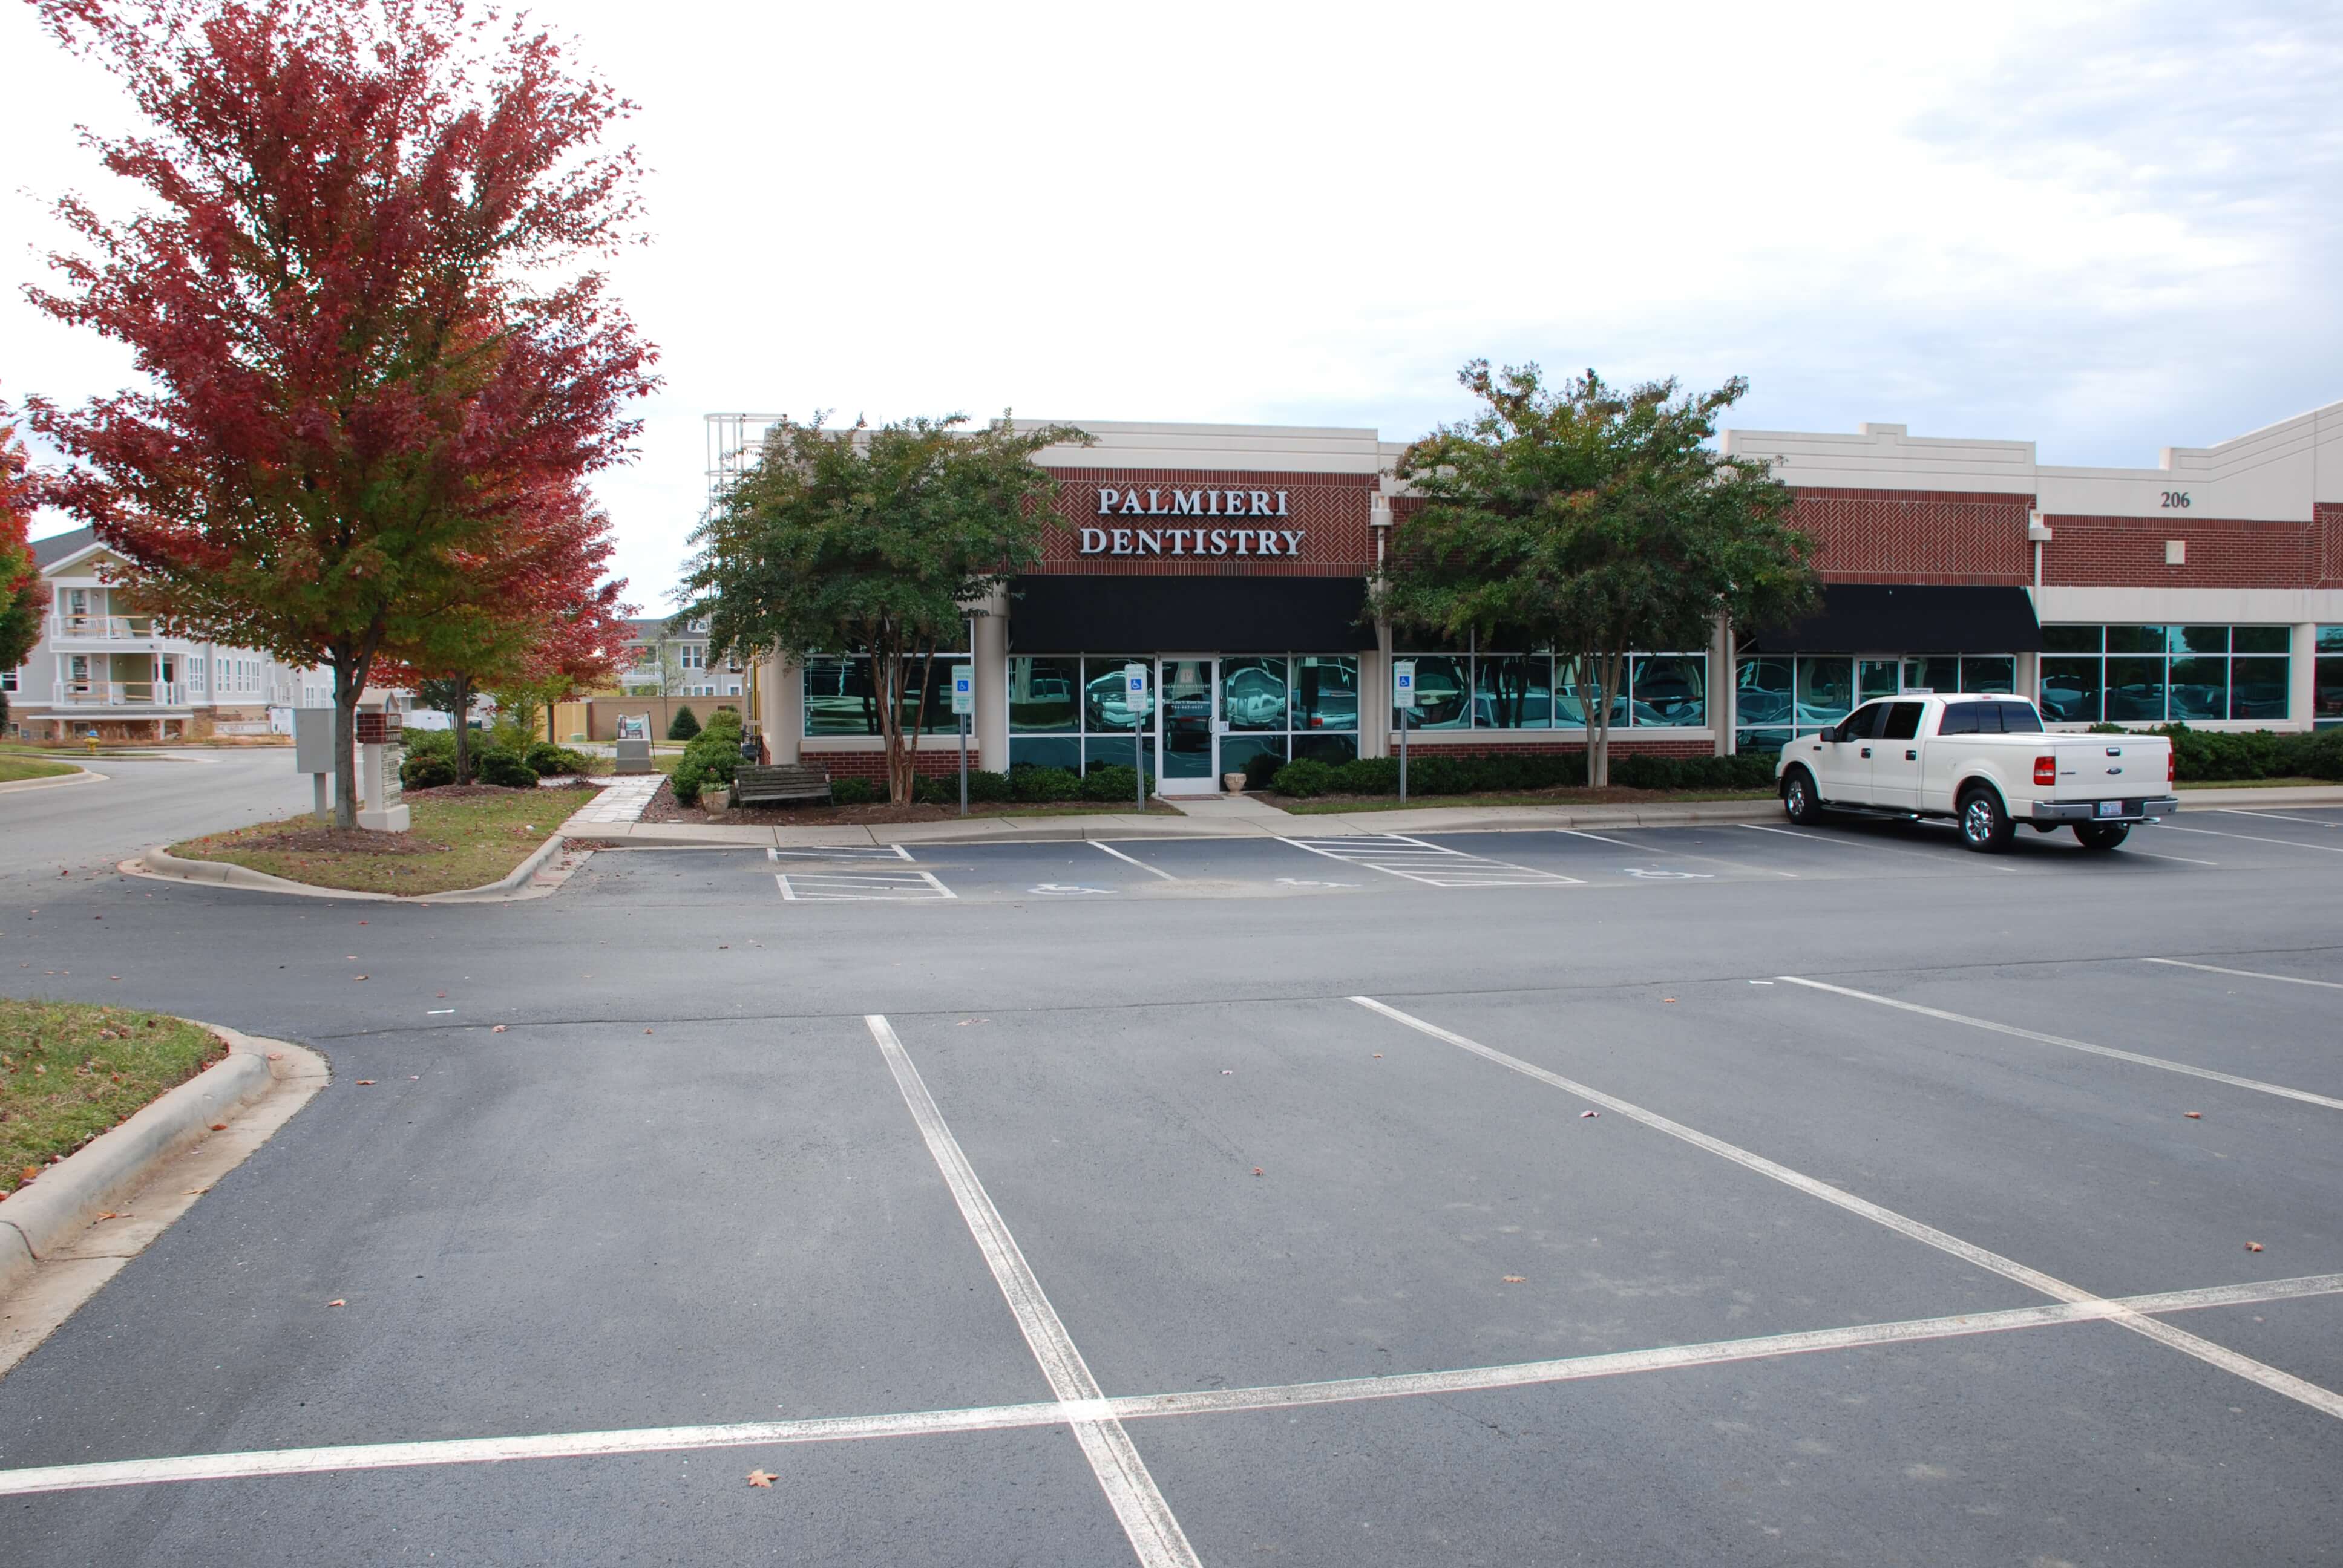 Palmieri Dentistry, the Center For Dental Excellence